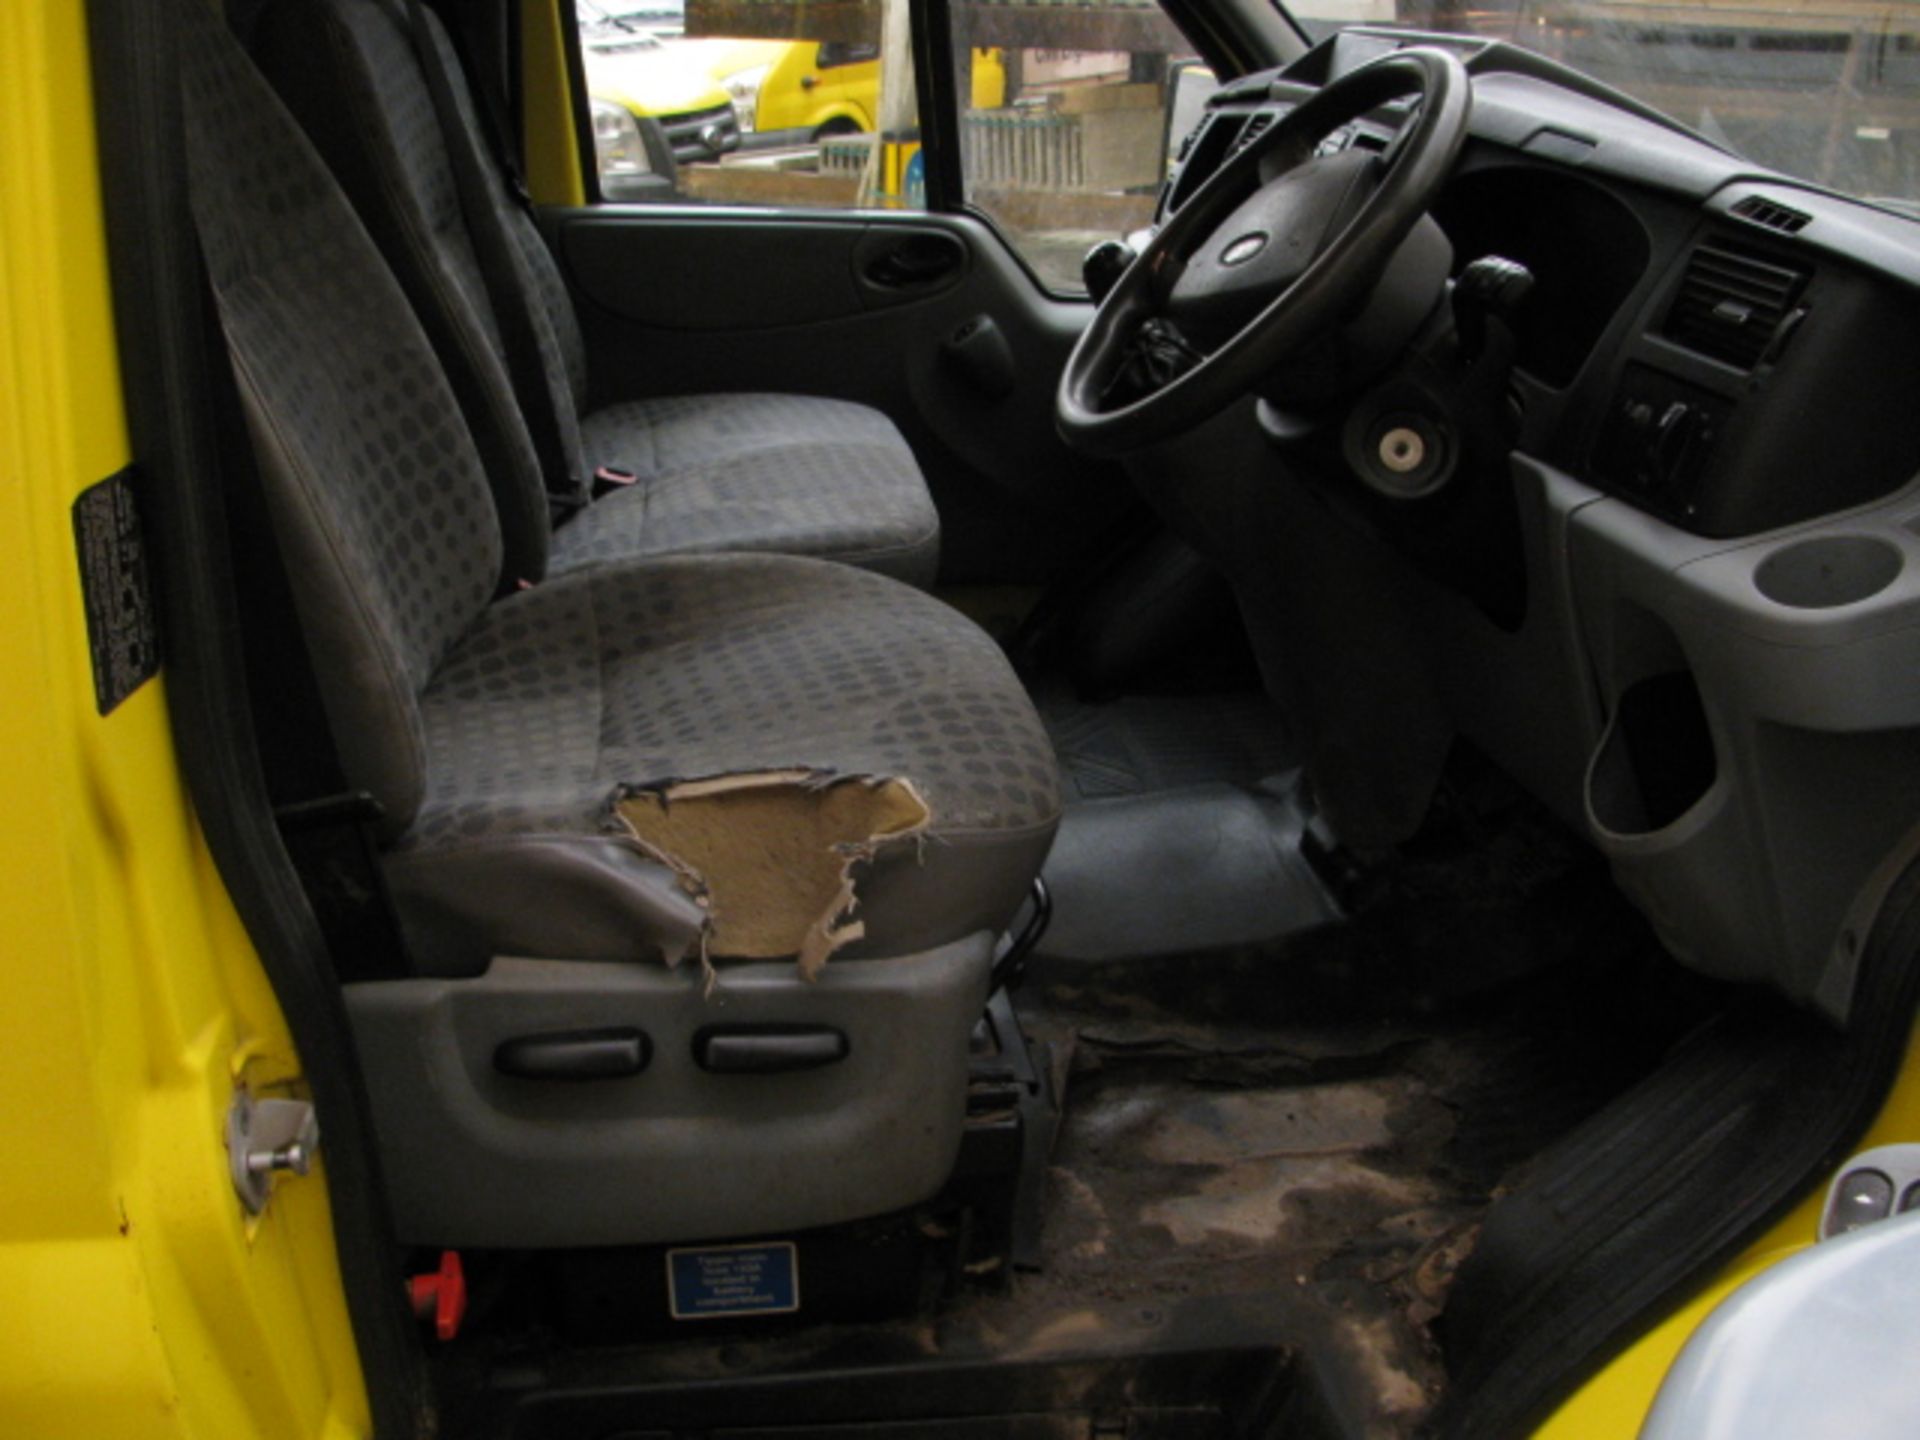 Ford Transit 100 T350 double cab tipper 2009 - Image 8 of 9